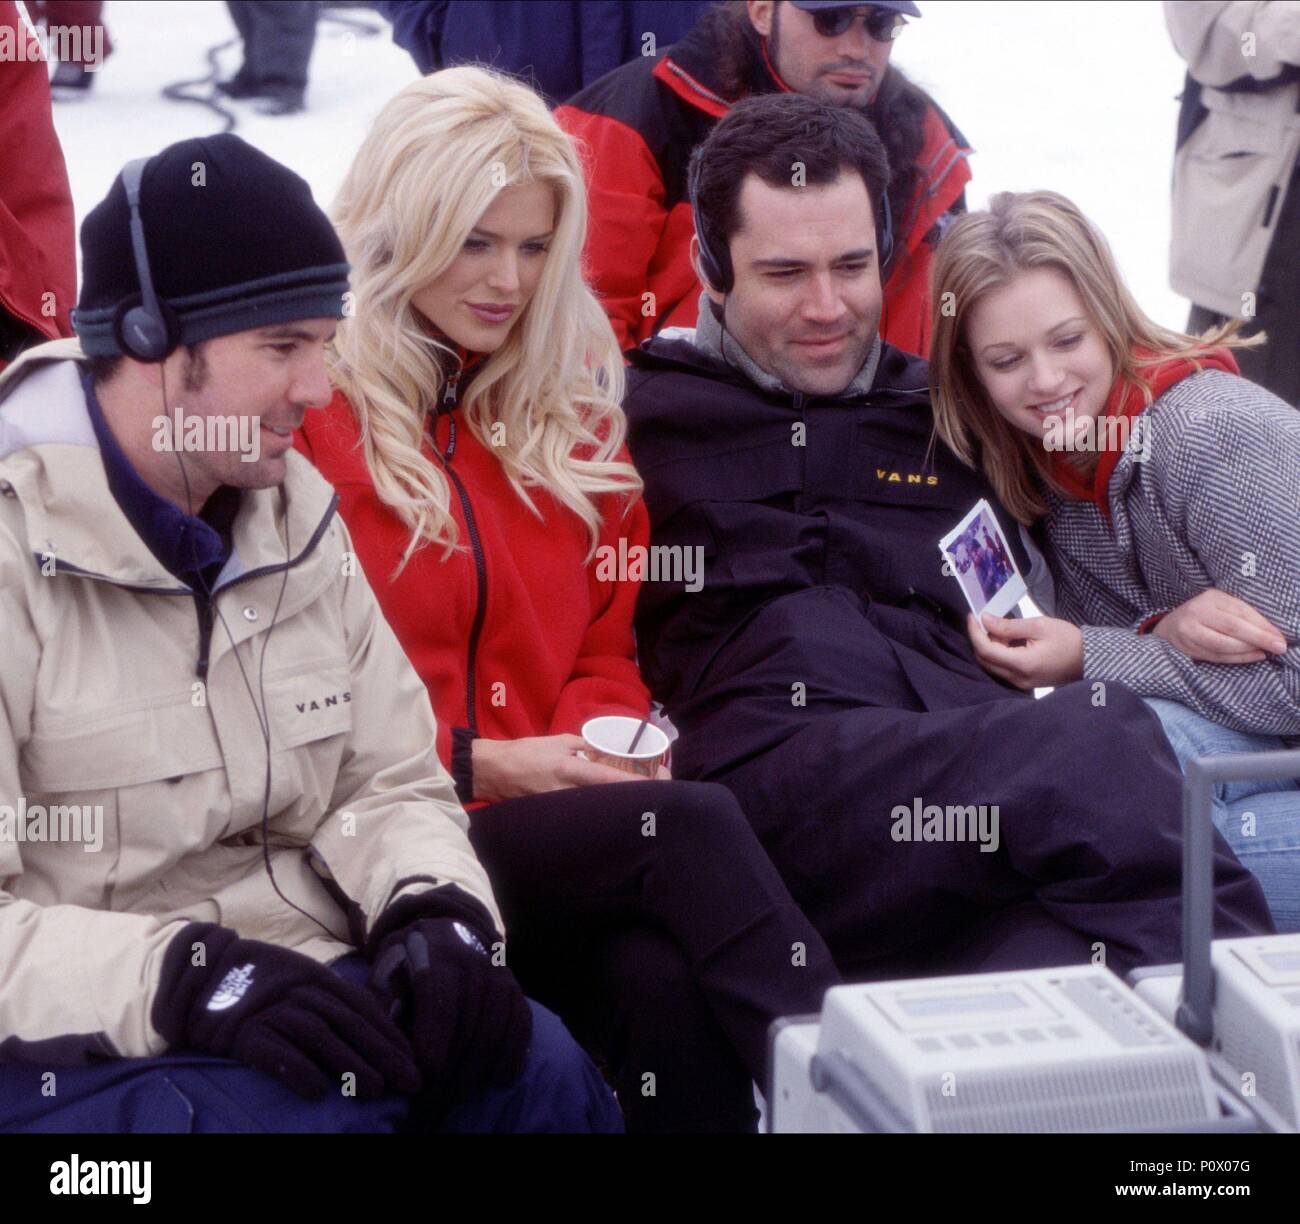 Original Film Title: OUT COLD.  English Title: OUT COLD.  Film Director: THE MALLOYS; BRENDAN MALLOY; EMMETT MALLOY.  Year: 2001.  Stars: VICTORIA SILVSTEDT; A. J. COOK; EMMETT MALLOY. Credit: TOUCHSTONE PICTURES / Album Stock Photo